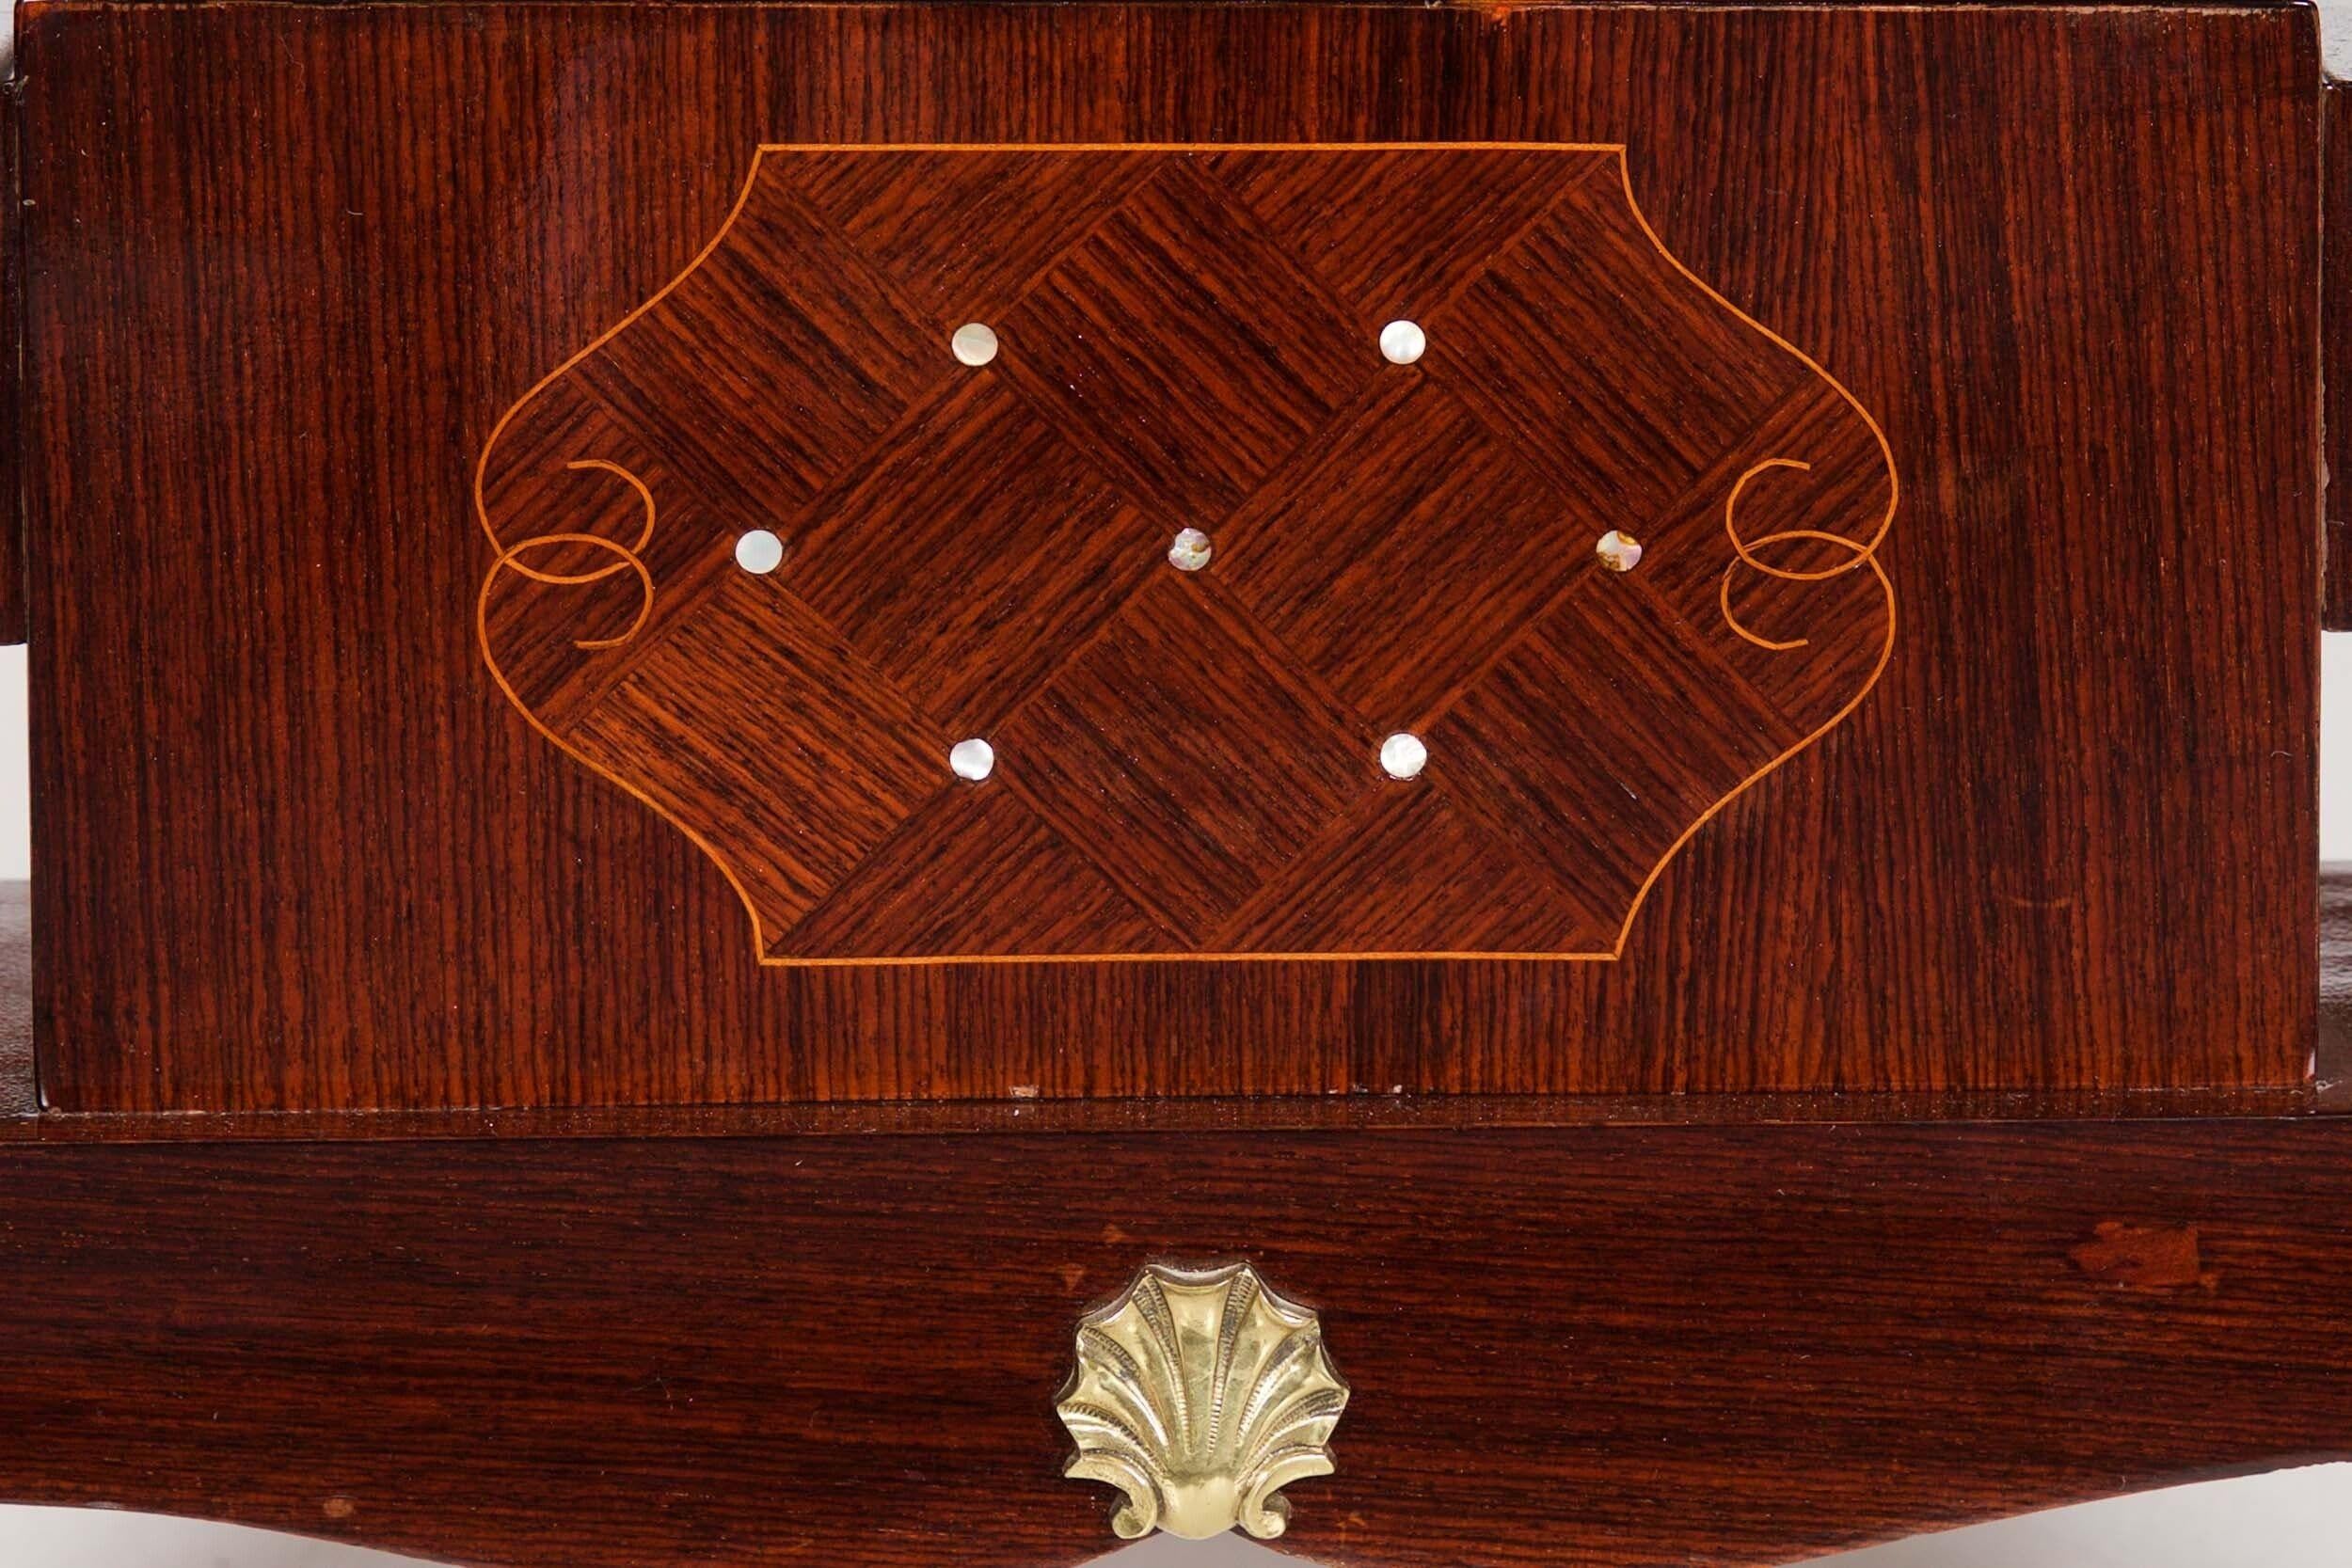 20th Century French Art Deco Inlaid Mother-of-Pearl Rosewood Dining Table, circa 1940s For Sale